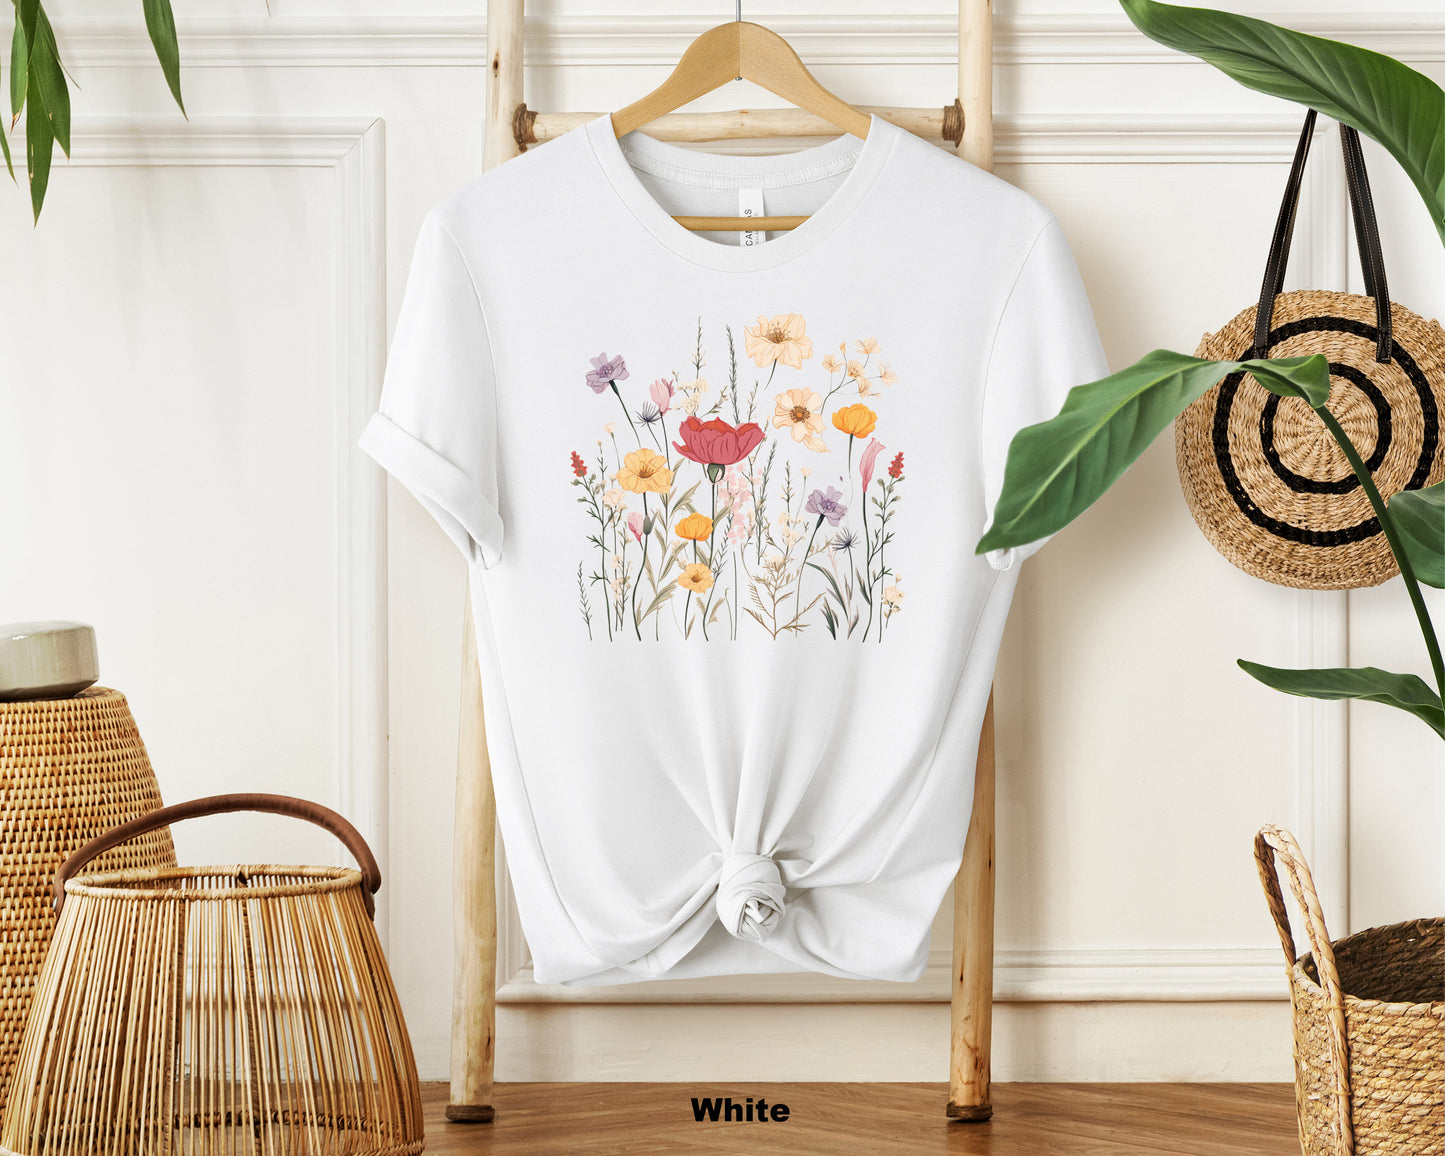 Whispering Wildflowers Women's Floral Print Top - Nature's Tranquility T-Shirt